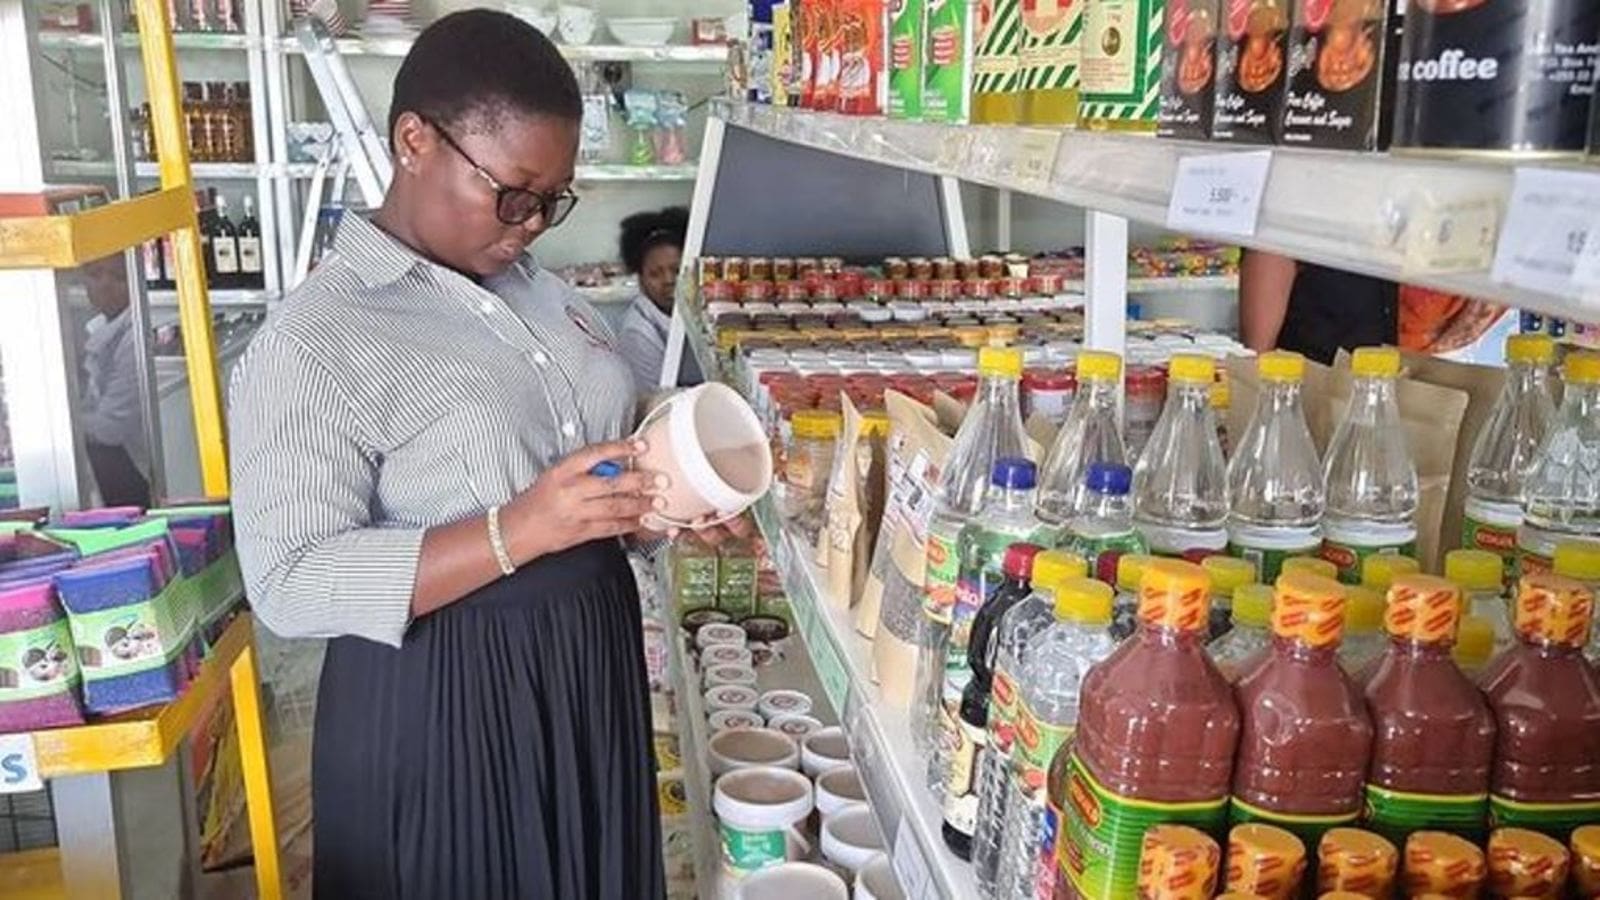 Tanzania Bureau of Standards warns traders against tampering with expiry dates on food labels